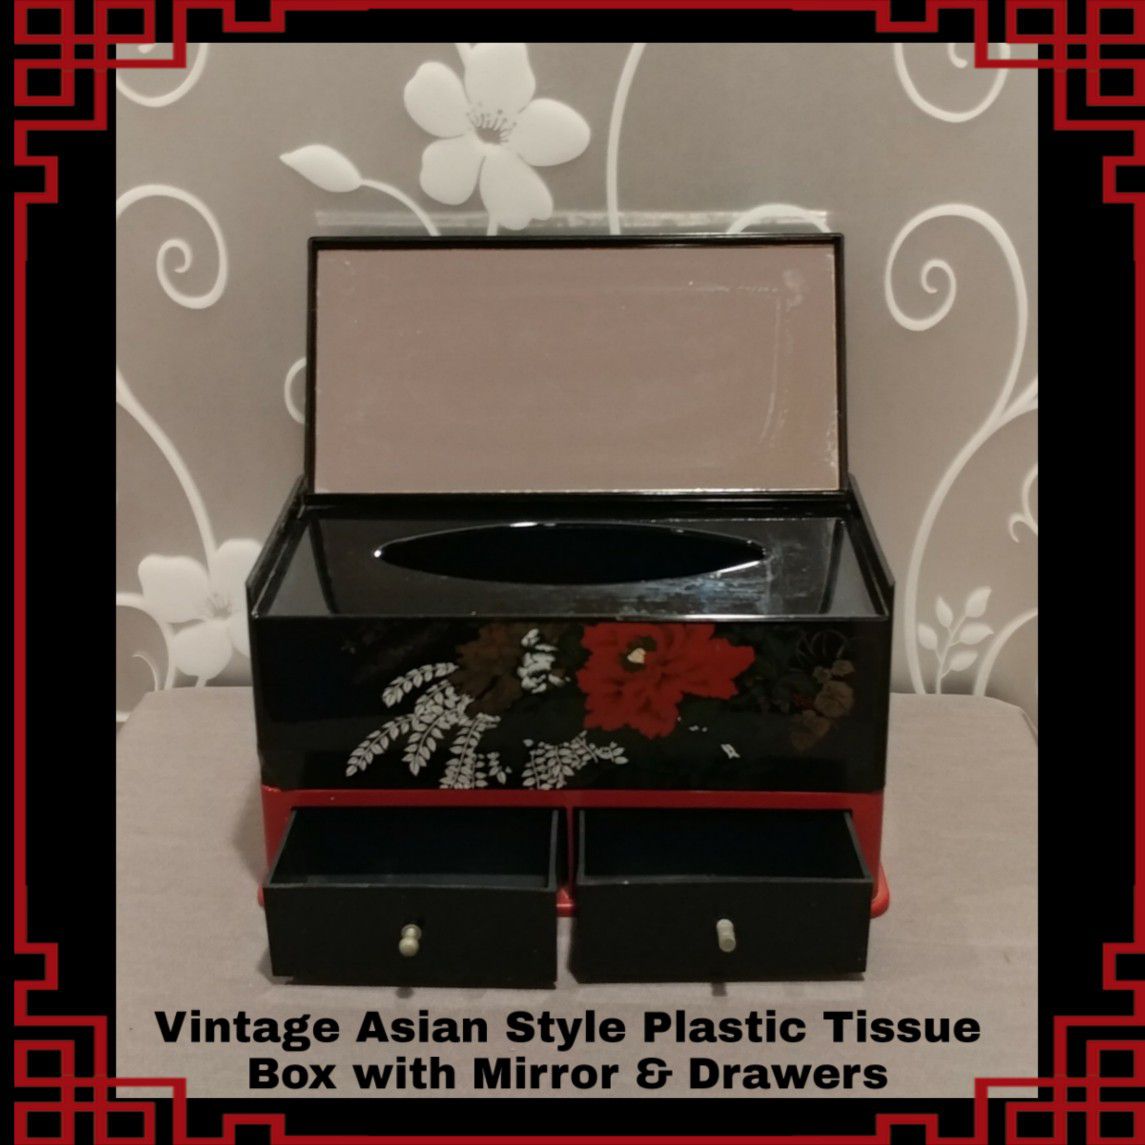 VINTAGE ASIAN STYLE PLASTIC TISSUE BOX WITH MIRROR & DRAWERS